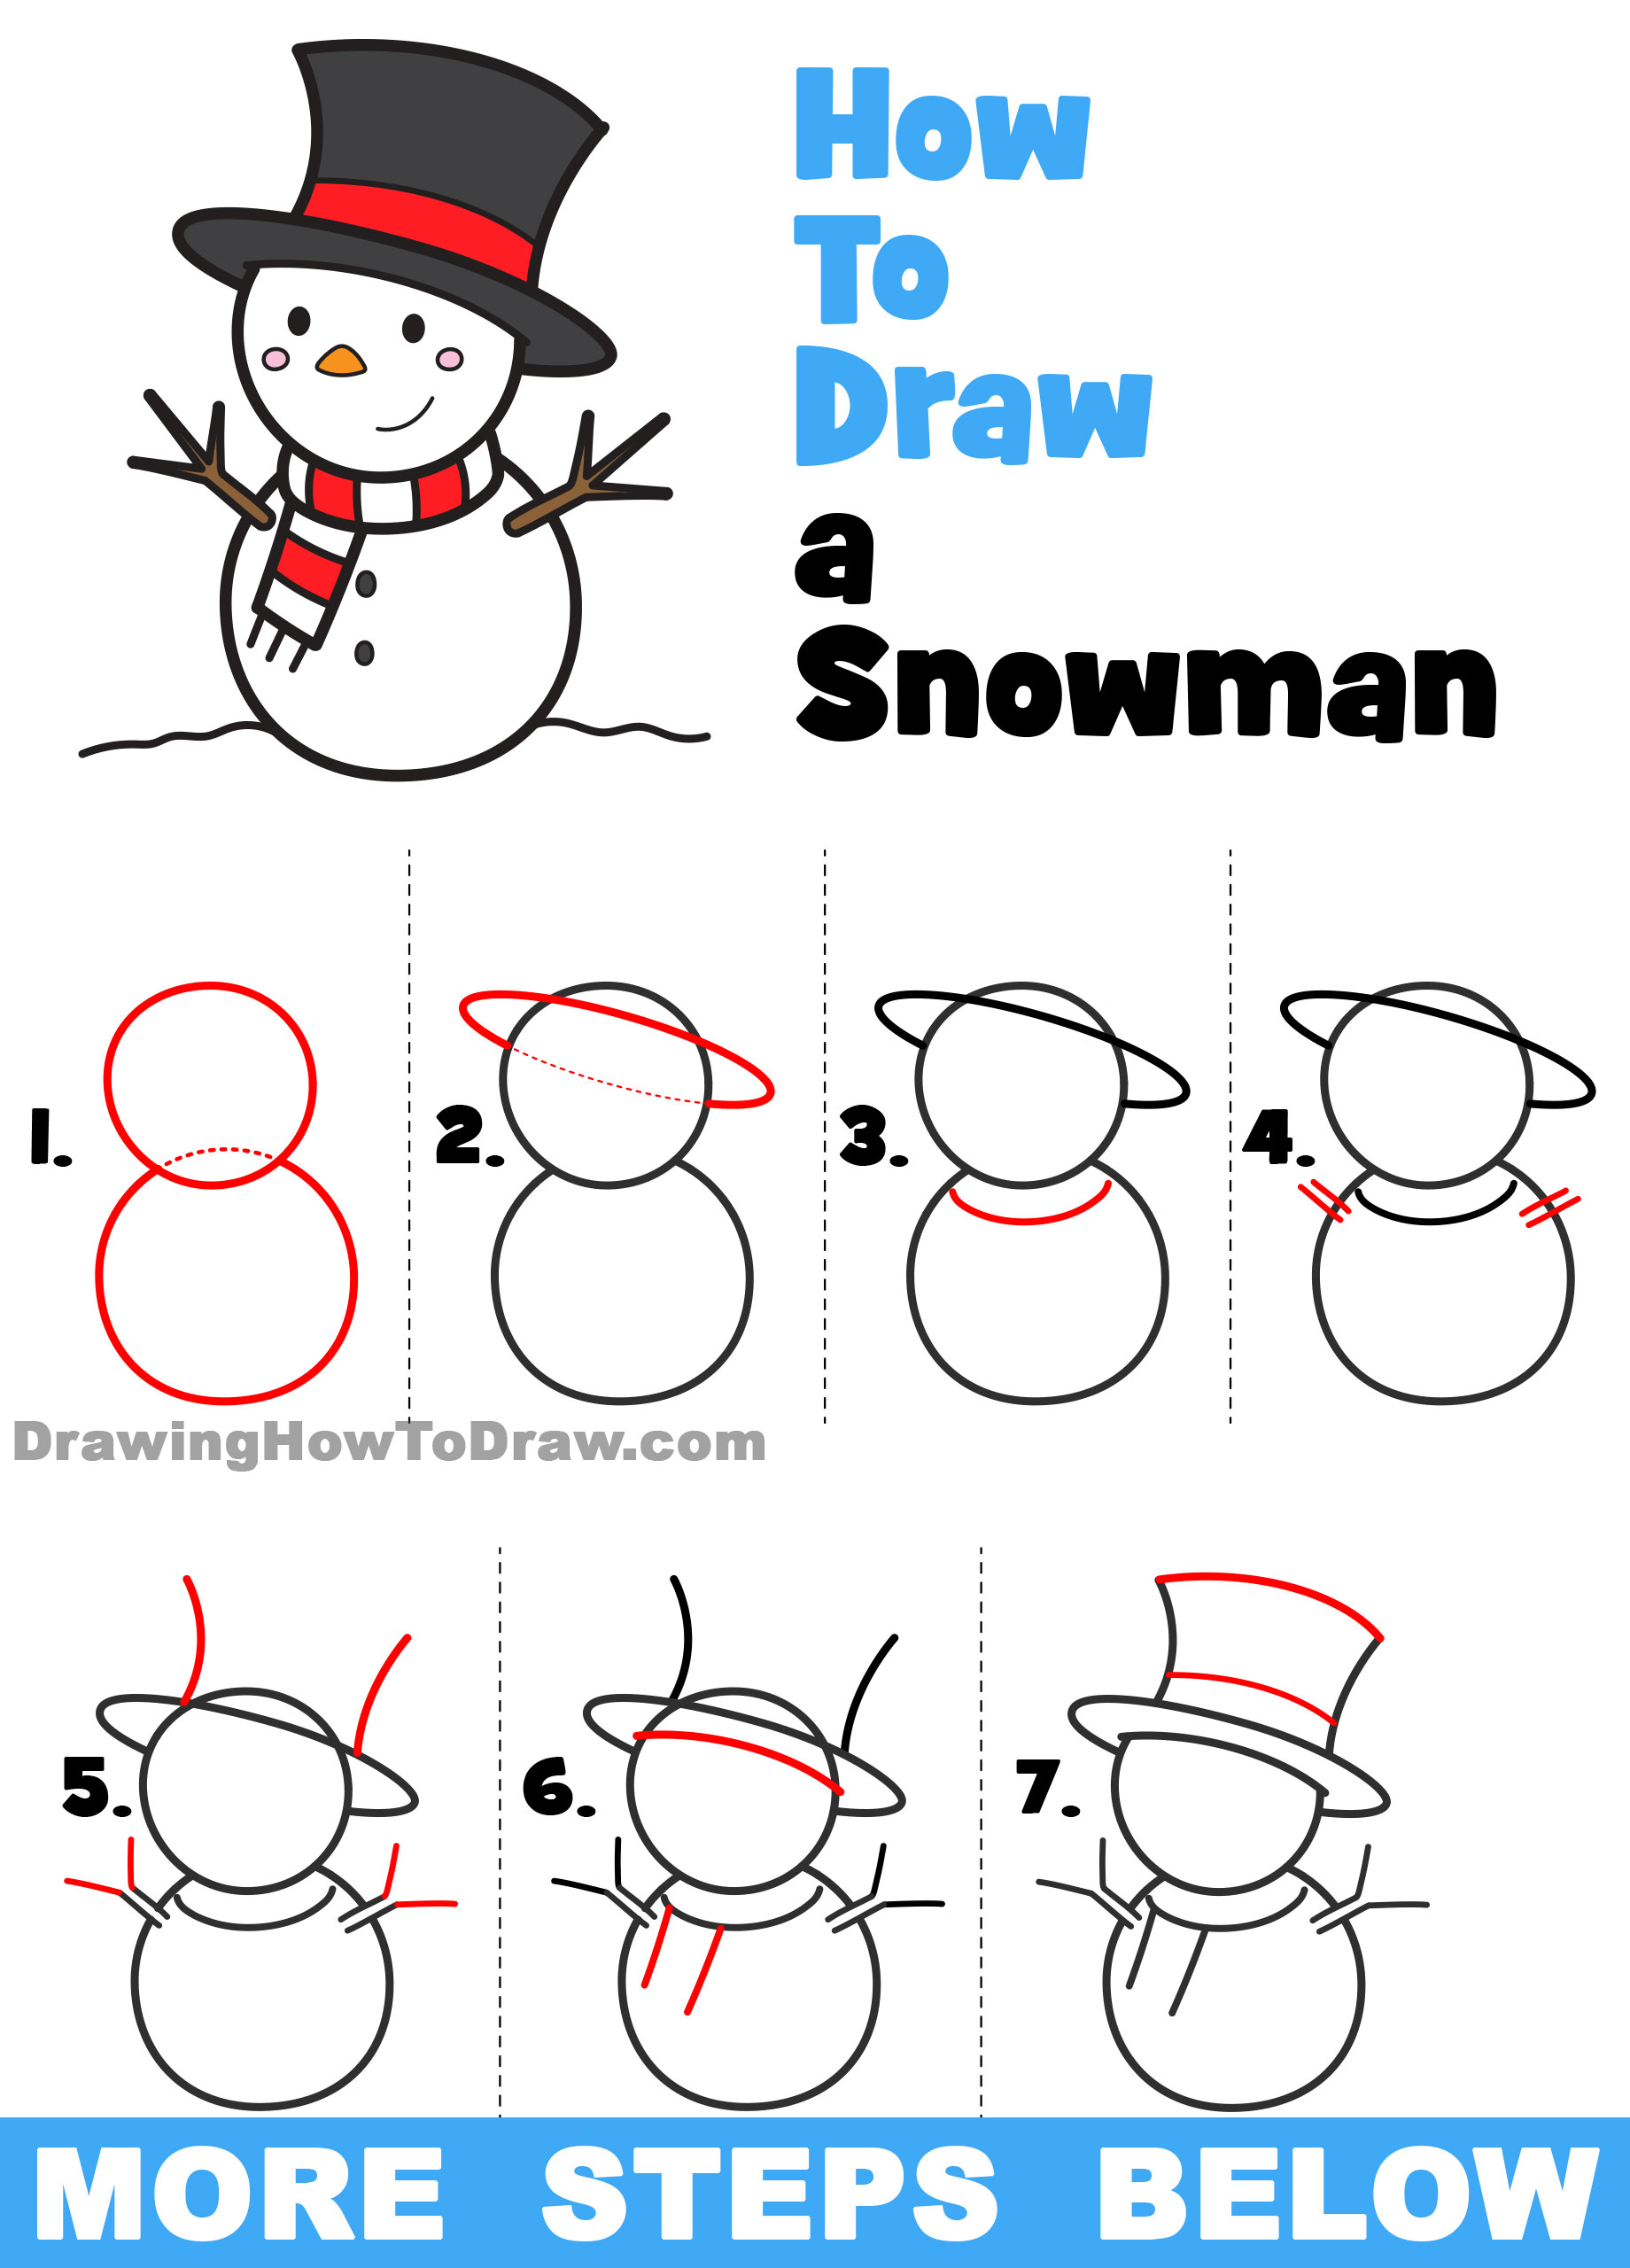 How to Draw a Cute Cartoon Snowman for Kids and Beginners - How to Draw  Step by Step Drawing Tutorials